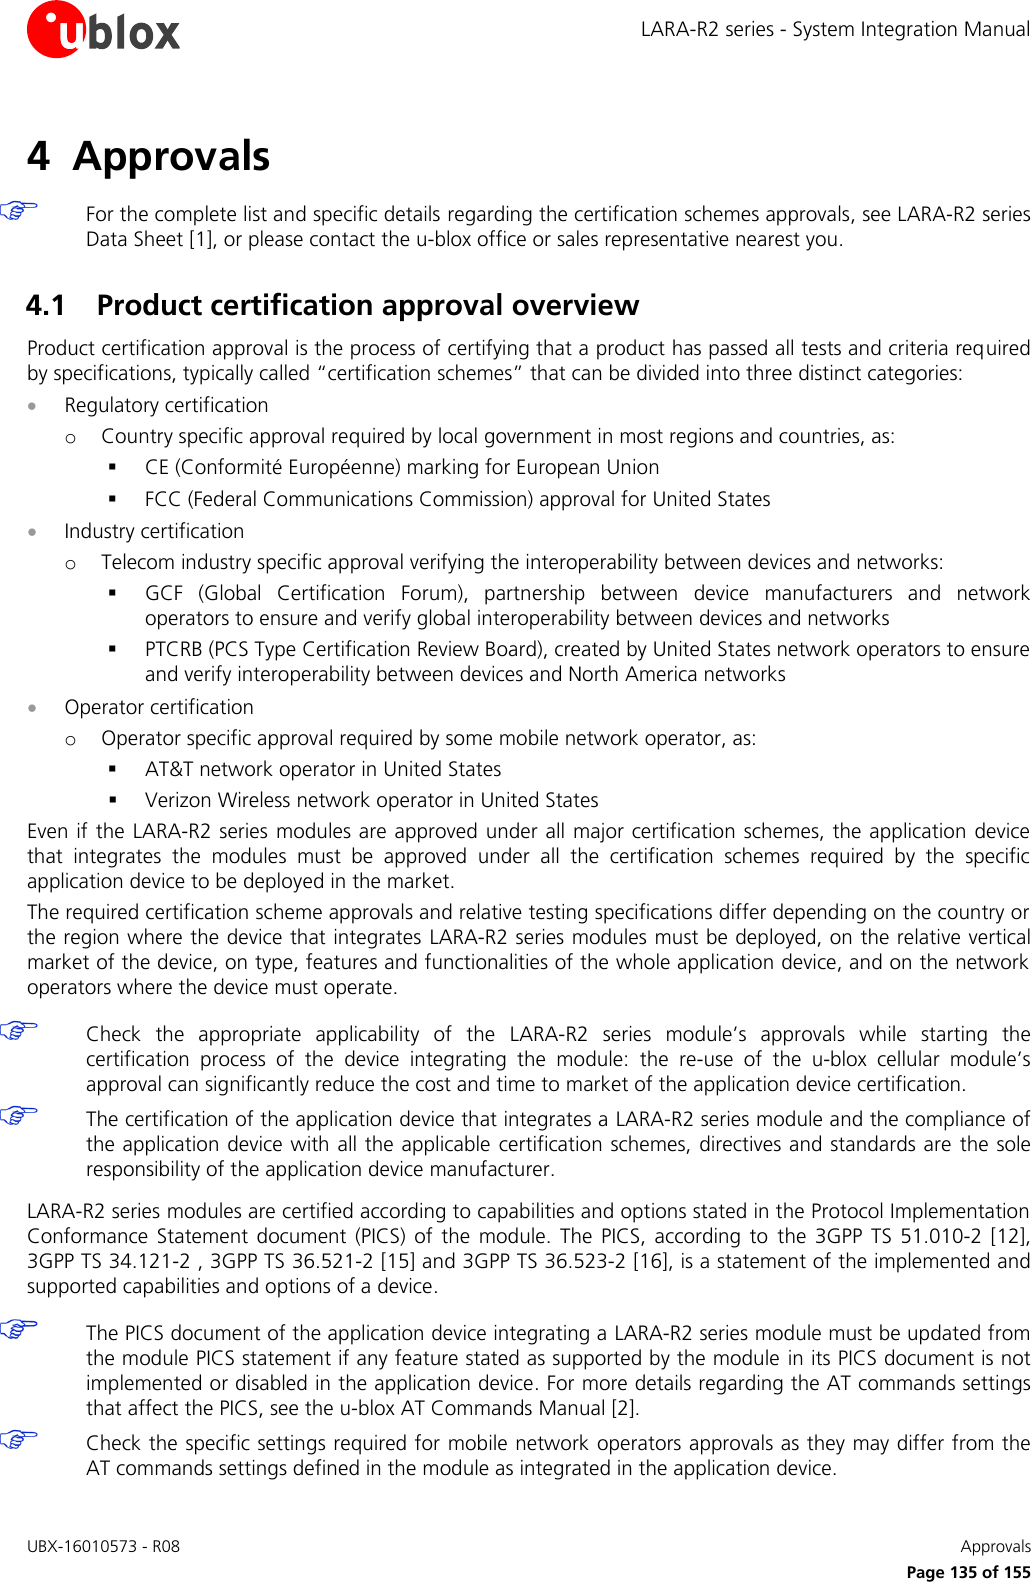 LARA-R2 series - System Integration Manual UBX-16010573 - R08    Approvals     Page 135 of 155 4 Approvals   For the complete list and specific details regarding the certification schemes approvals, see LARA-R2 series Data Sheet [1], or please contact the u-blox office or sales representative nearest you.  4.1 Product certification approval overview Product certification approval is the process of certifying that a product has passed all tests and criteria required by specifications, typically called “certification schemes” that can be divided into three distinct categories:  Regulatory certification o Country specific approval required by local government in most regions and countries, as:  CE (Conformité Européenne) marking for European Union  FCC (Federal Communications Commission) approval for United States  Industry certification o Telecom industry specific approval verifying the interoperability between devices and networks:  GCF  (Global  Certification  Forum),  partnership  between  device  manufacturers  and  network operators to ensure and verify global interoperability between devices and networks  PTCRB (PCS Type Certification Review Board), created by United States network operators to ensure and verify interoperability between devices and North America networks  Operator certification o Operator specific approval required by some mobile network operator, as:  AT&amp;T network operator in United States  Verizon Wireless network operator in United States Even if the LARA-R2 series modules are approved under all major certification schemes, the application device that  integrates  the  modules  must  be  approved  under  all  the  certification  schemes  required  by  the  specific application device to be deployed in the market. The required certification scheme approvals and relative testing specifications differ depending on the country or the region where the device that integrates  LARA-R2 series modules must be deployed, on the relative vertical market of the device, on type, features and functionalities of the whole application device, and on the network operators where the device must operate.   Check  the  appropriate  applicability  of  the  LARA-R2  series  module’s  approvals  while  starting  the certification  process  of  the  device  integrating  the  module:  the  re-use  of  the  u-blox  cellular  module’s approval can significantly reduce the cost and time to market of the application device certification.  The certification of the application device that integrates a LARA-R2 series module and the compliance of the application device with all the applicable  certification schemes, directives and  standards are  the sole responsibility of the application device manufacturer.  LARA-R2 series modules are certified according to capabilities and options stated in the Protocol Implementation Conformance  Statement  document  (PICS)  of  the  module.  The  PICS,  according  to  the  3GPP  TS  51.010-2  [12], 3GPP TS 34.121-2 , 3GPP TS 36.521-2 [15] and 3GPP TS 36.523-2 [16], is a statement of the implemented and supported capabilities and options of a device.   The PICS document of the application device integrating a LARA-R2 series module must be updated from the module PICS statement if any feature stated as supported by the module in its PICS document is not implemented or disabled in the application device. For more details regarding the AT commands settings that affect the PICS, see the u-blox AT Commands Manual [2].  Check the specific settings required for mobile network operators approvals as they may differ from the AT commands settings defined in the module as integrated in the application device.  